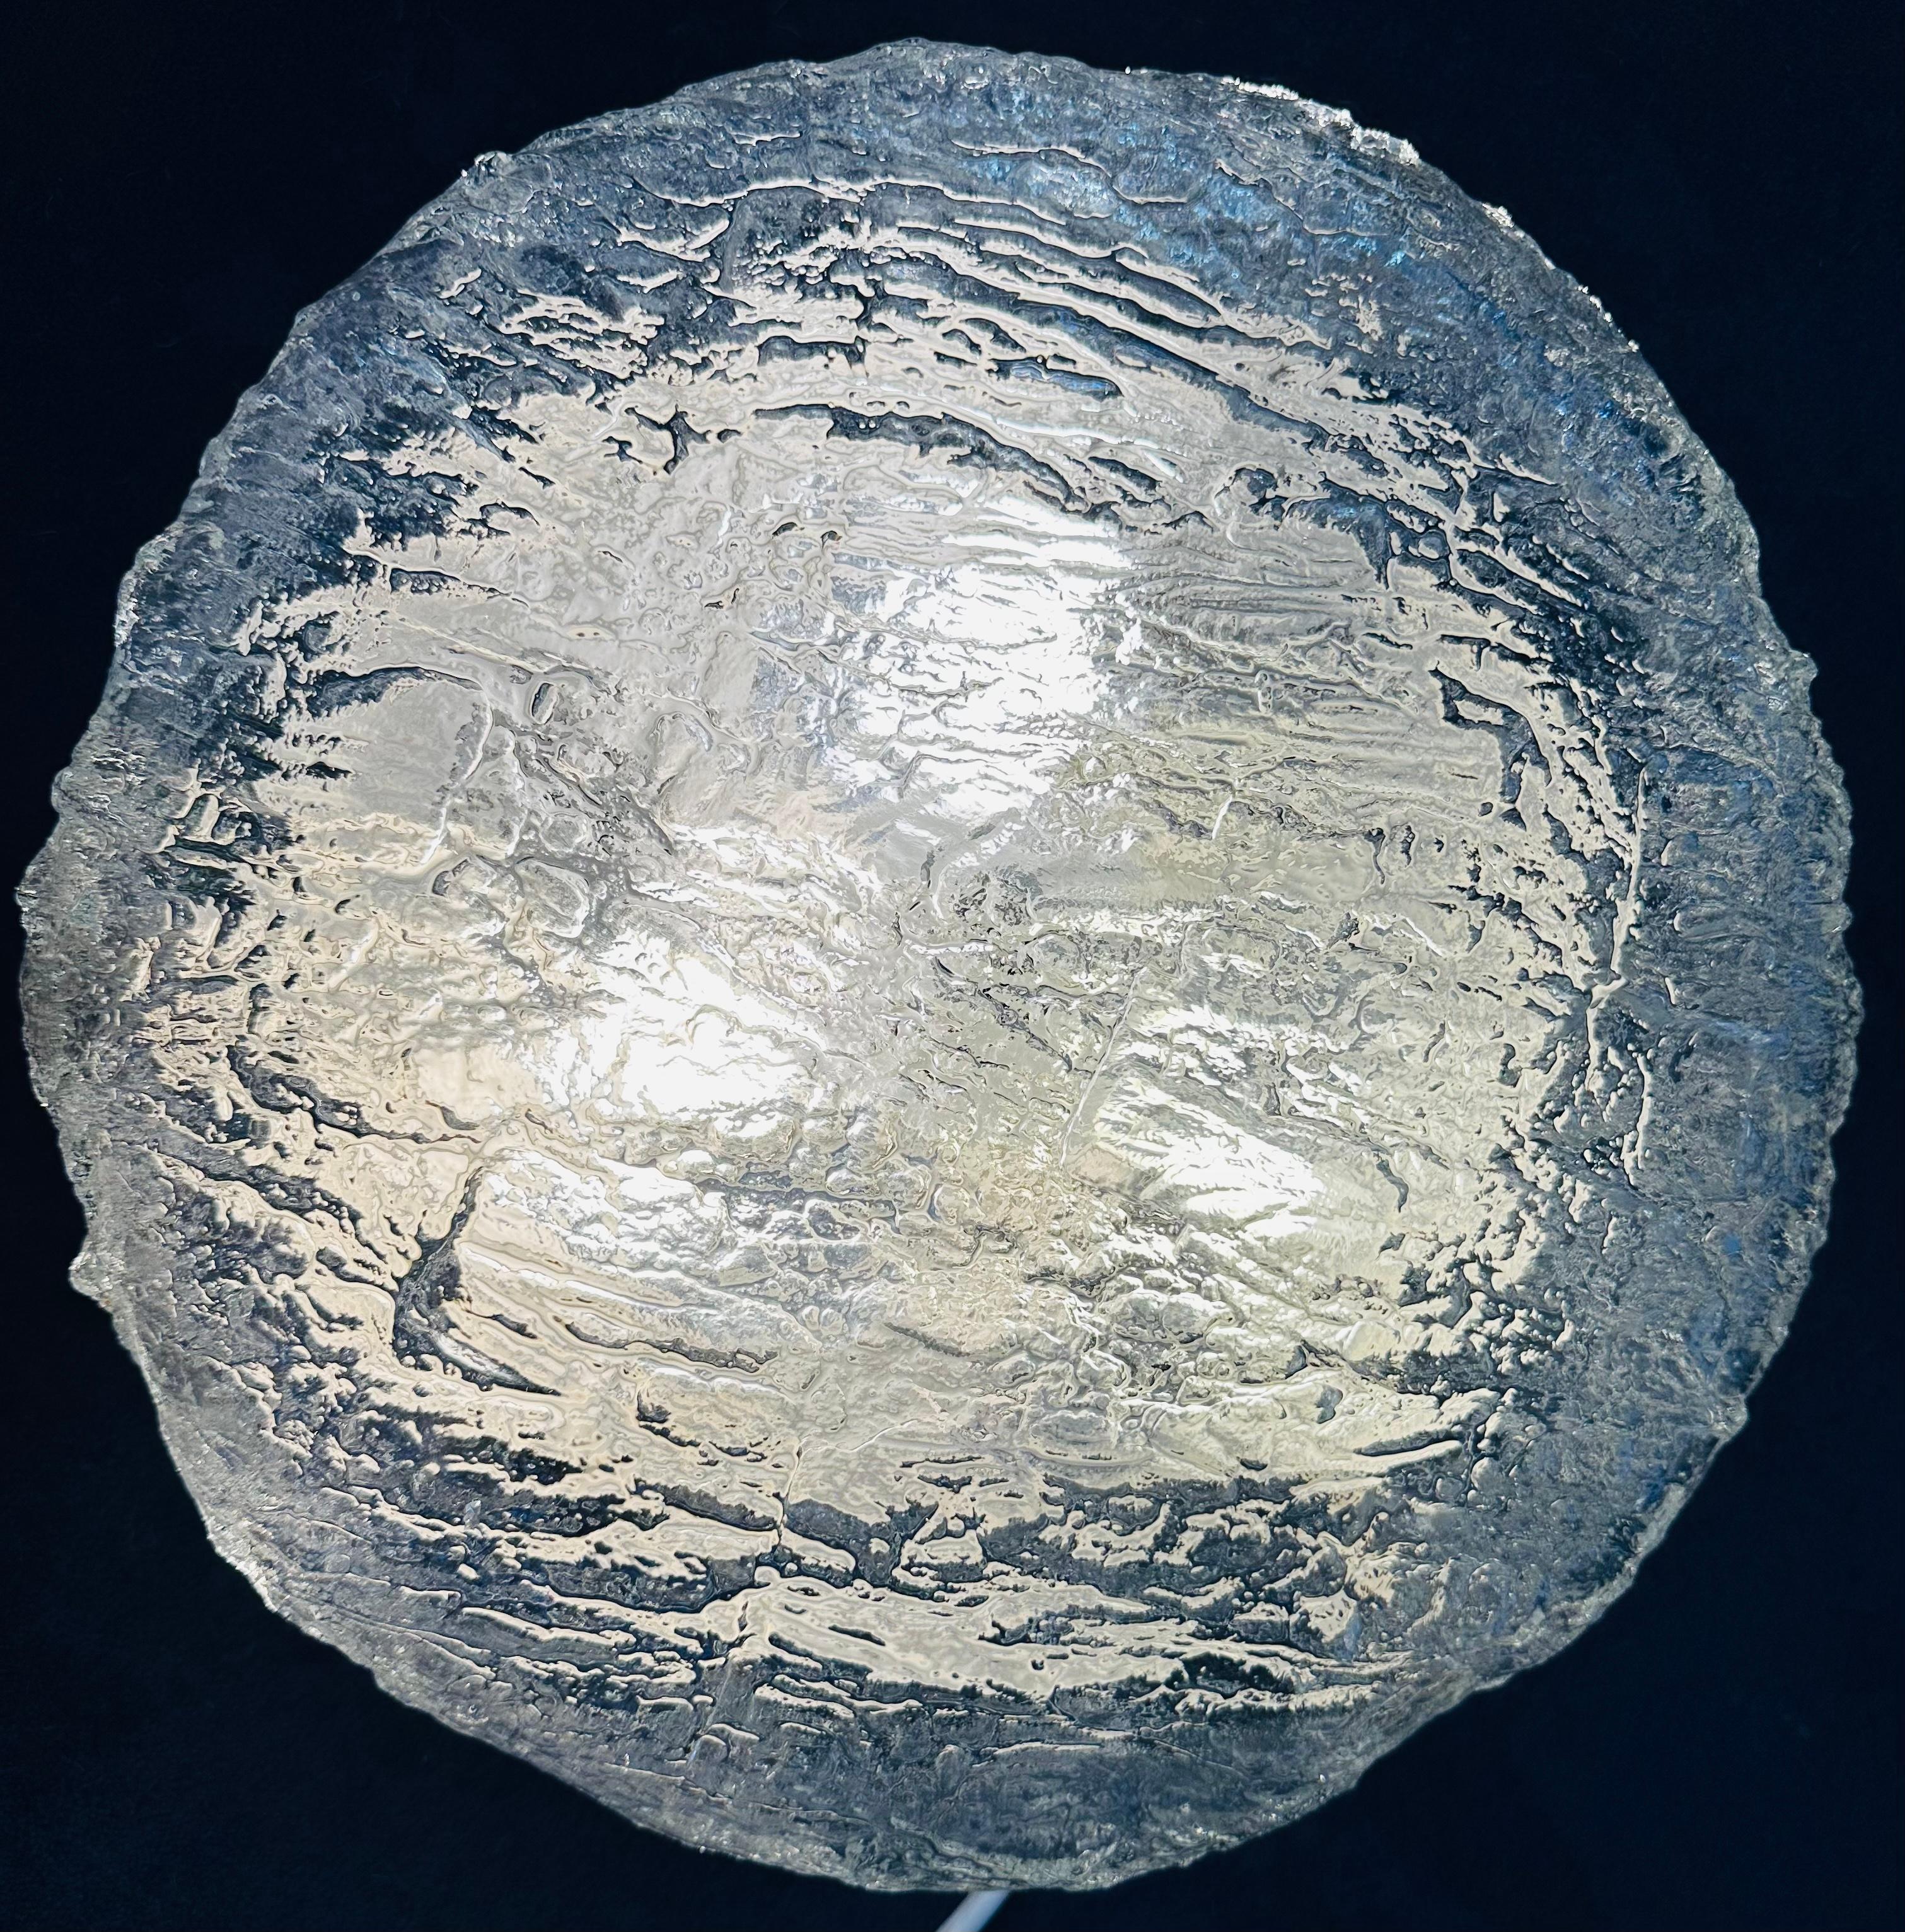 1970s circular flush mount ceiling light manufactured by Kaiser Leuchten in Germany.  the manufacturer's label is still present on the metal frame.

The heavily textured circular clear glass shade is made from a single piece of glass which is folded